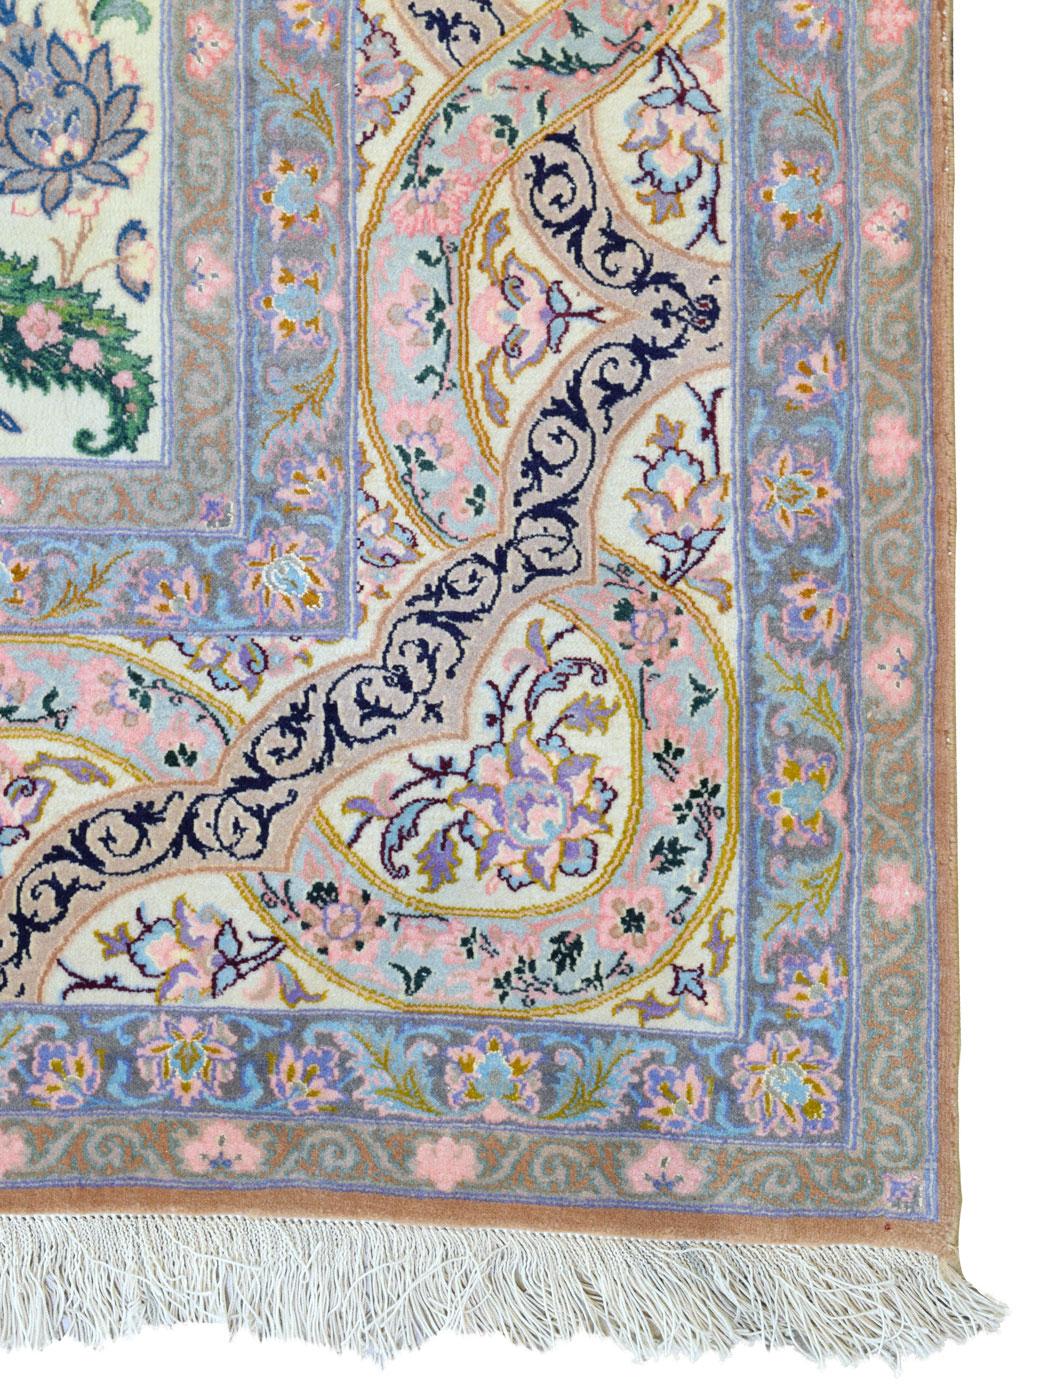 Hand-Knotted Wool and Silk Persian Isfahan Carpet, Purple and Pink, 5' x 7' In New Condition For Sale In New York, NY